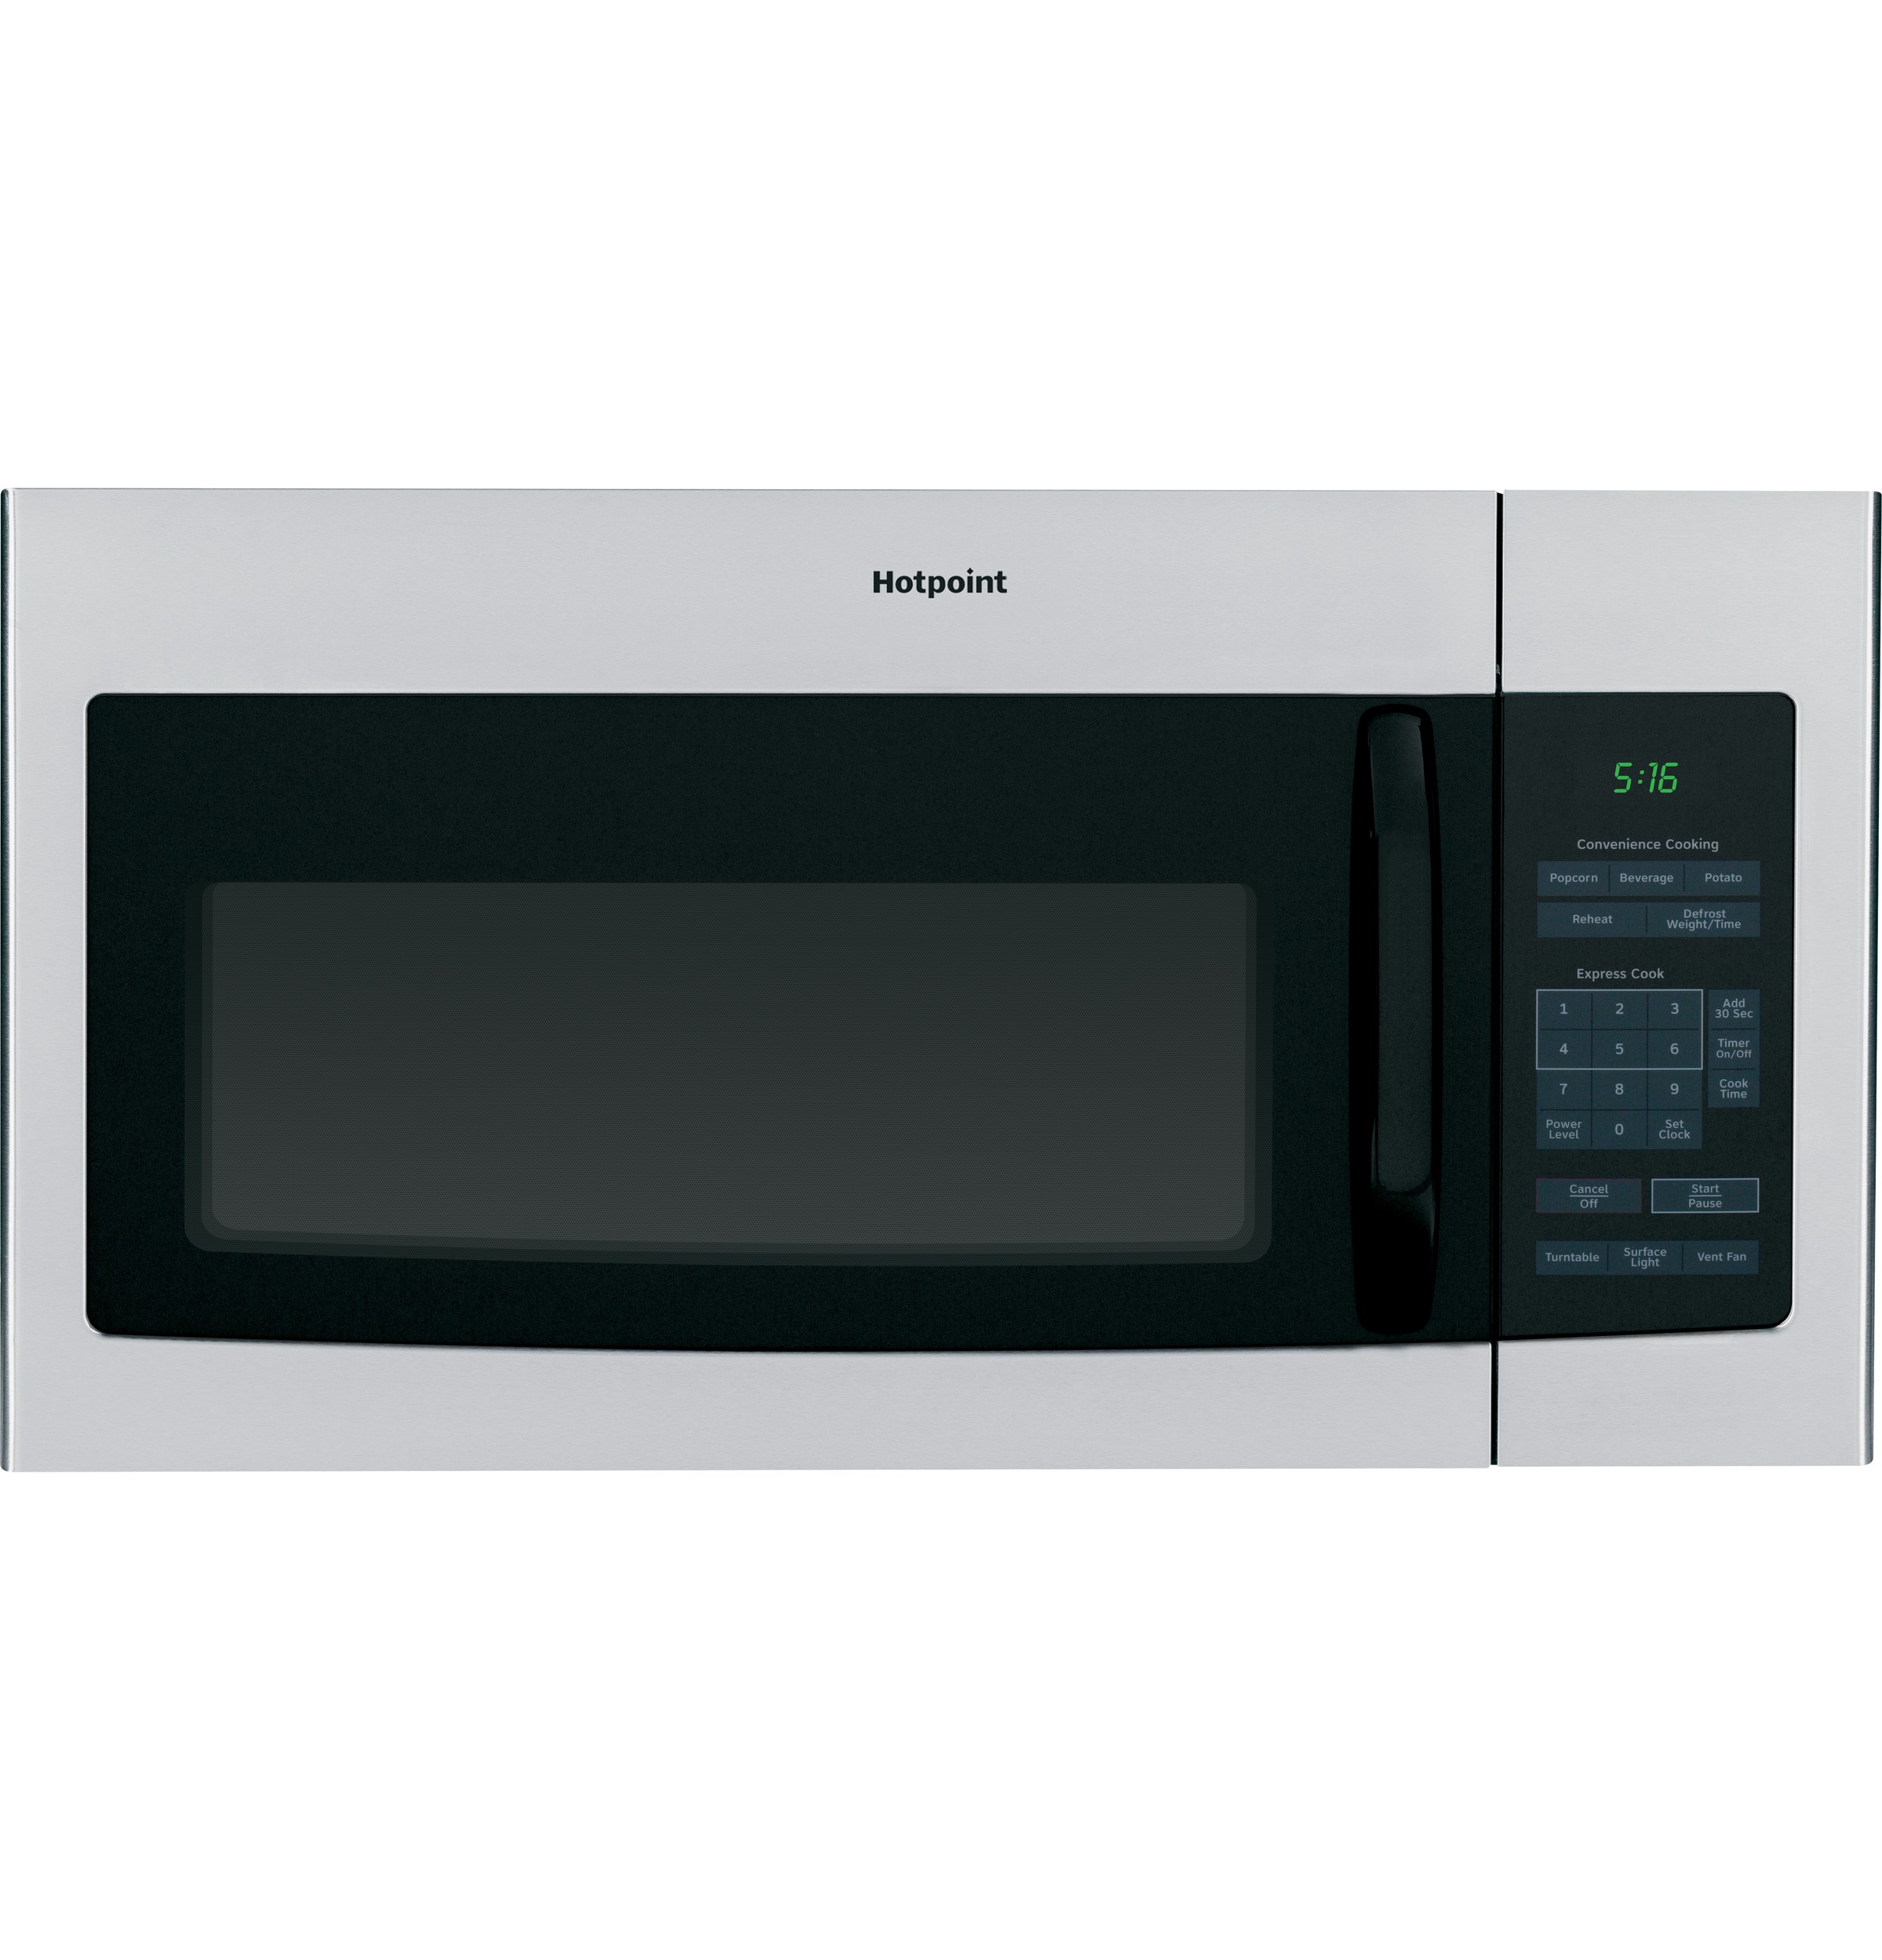 Hotpoint® 1.6 Cu. Ft. Over-the-Range Microwave Oven